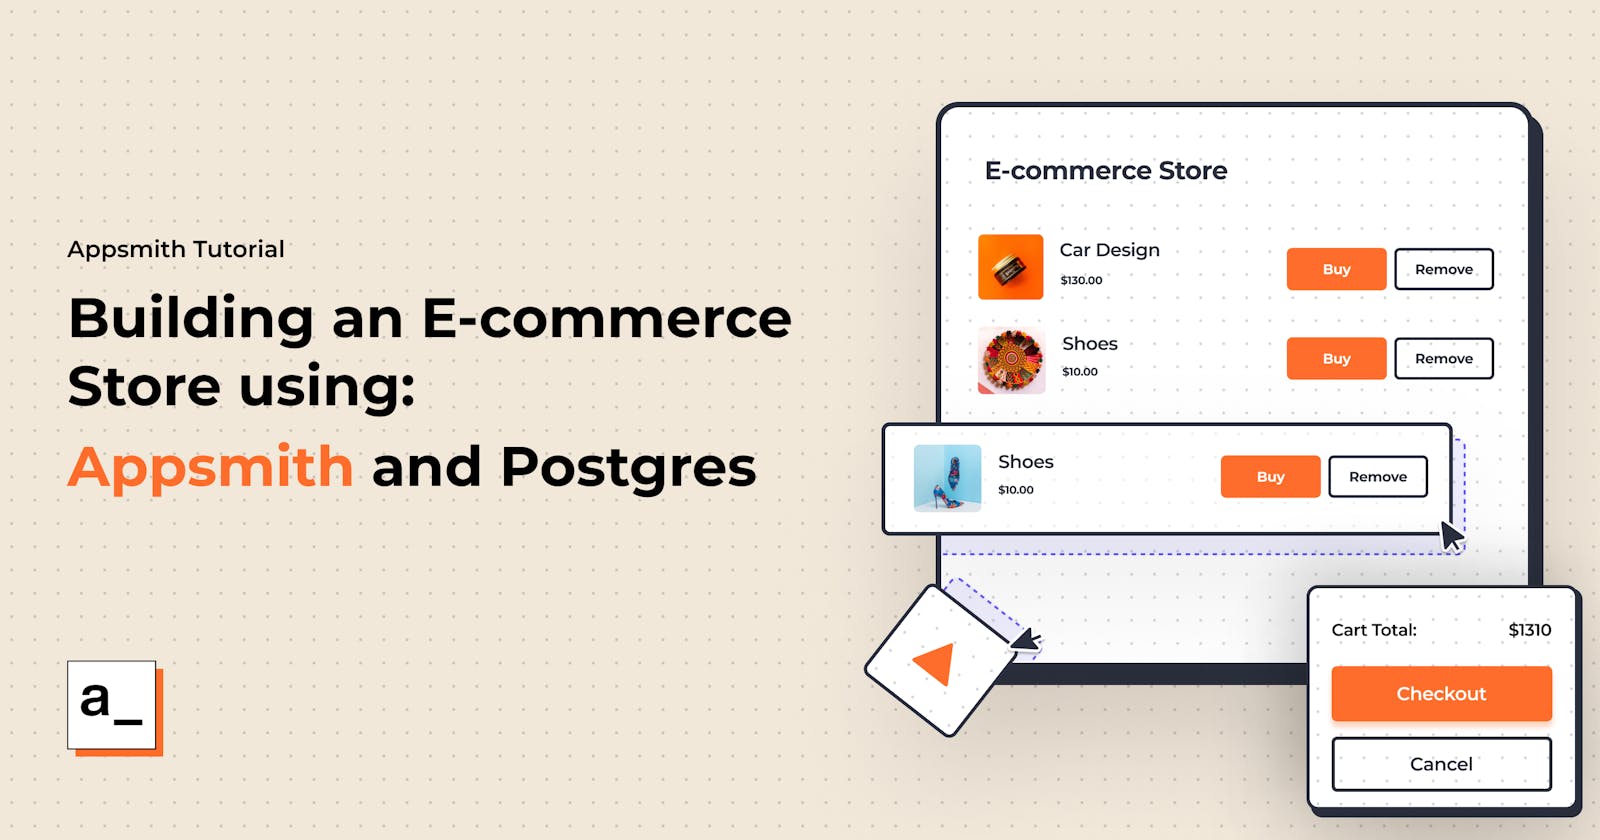 Building an E-commerce Store using Appsmith and Postgres